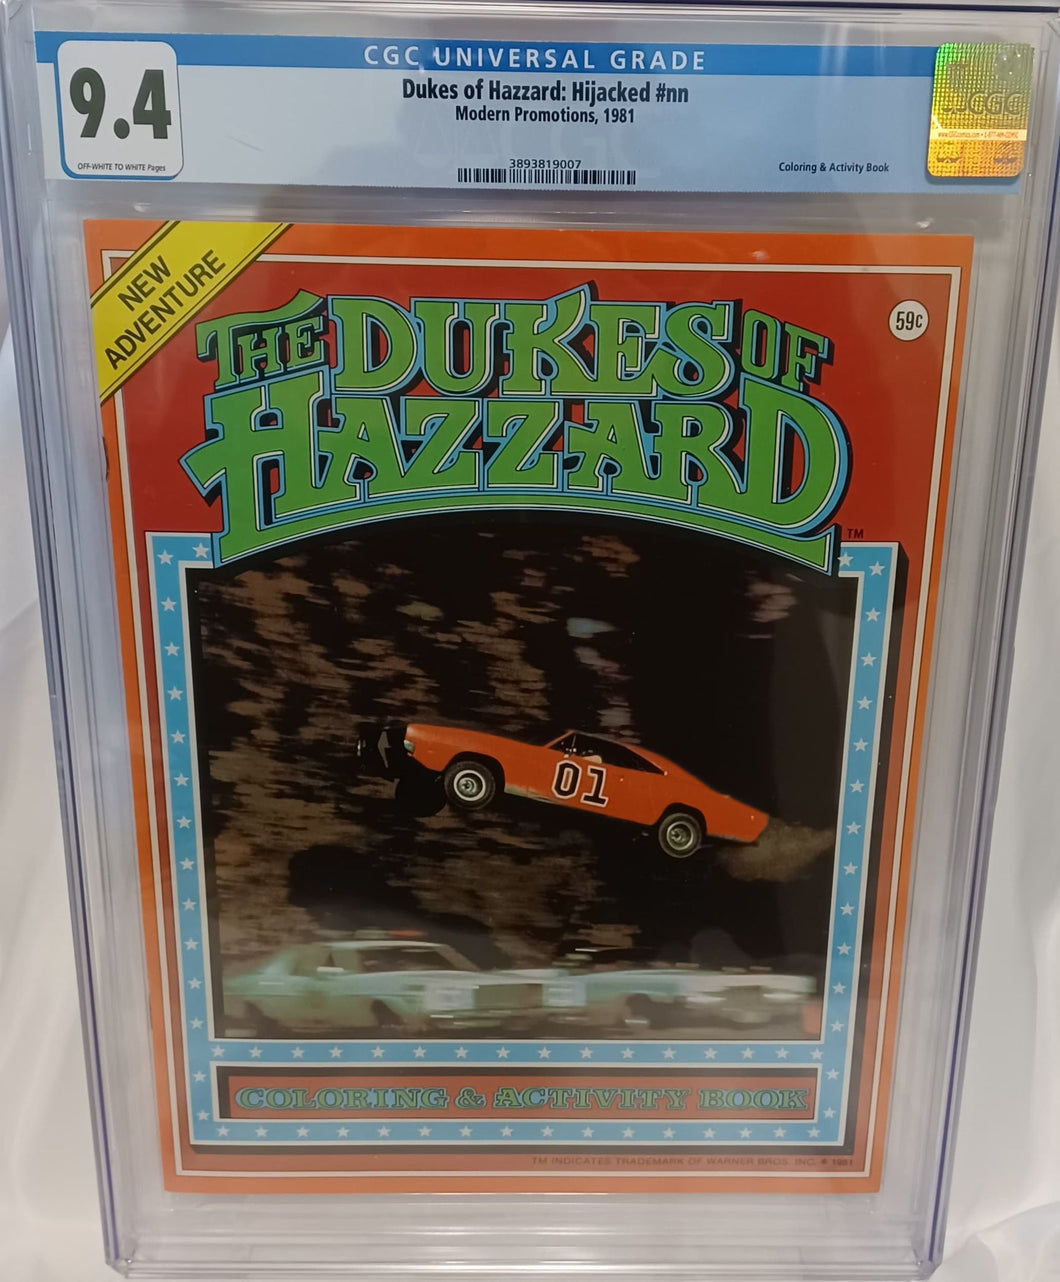 Dukes of Hazzard 1981 Coloring Book CGC 9.4 - RARE General Lee cover, highest on census